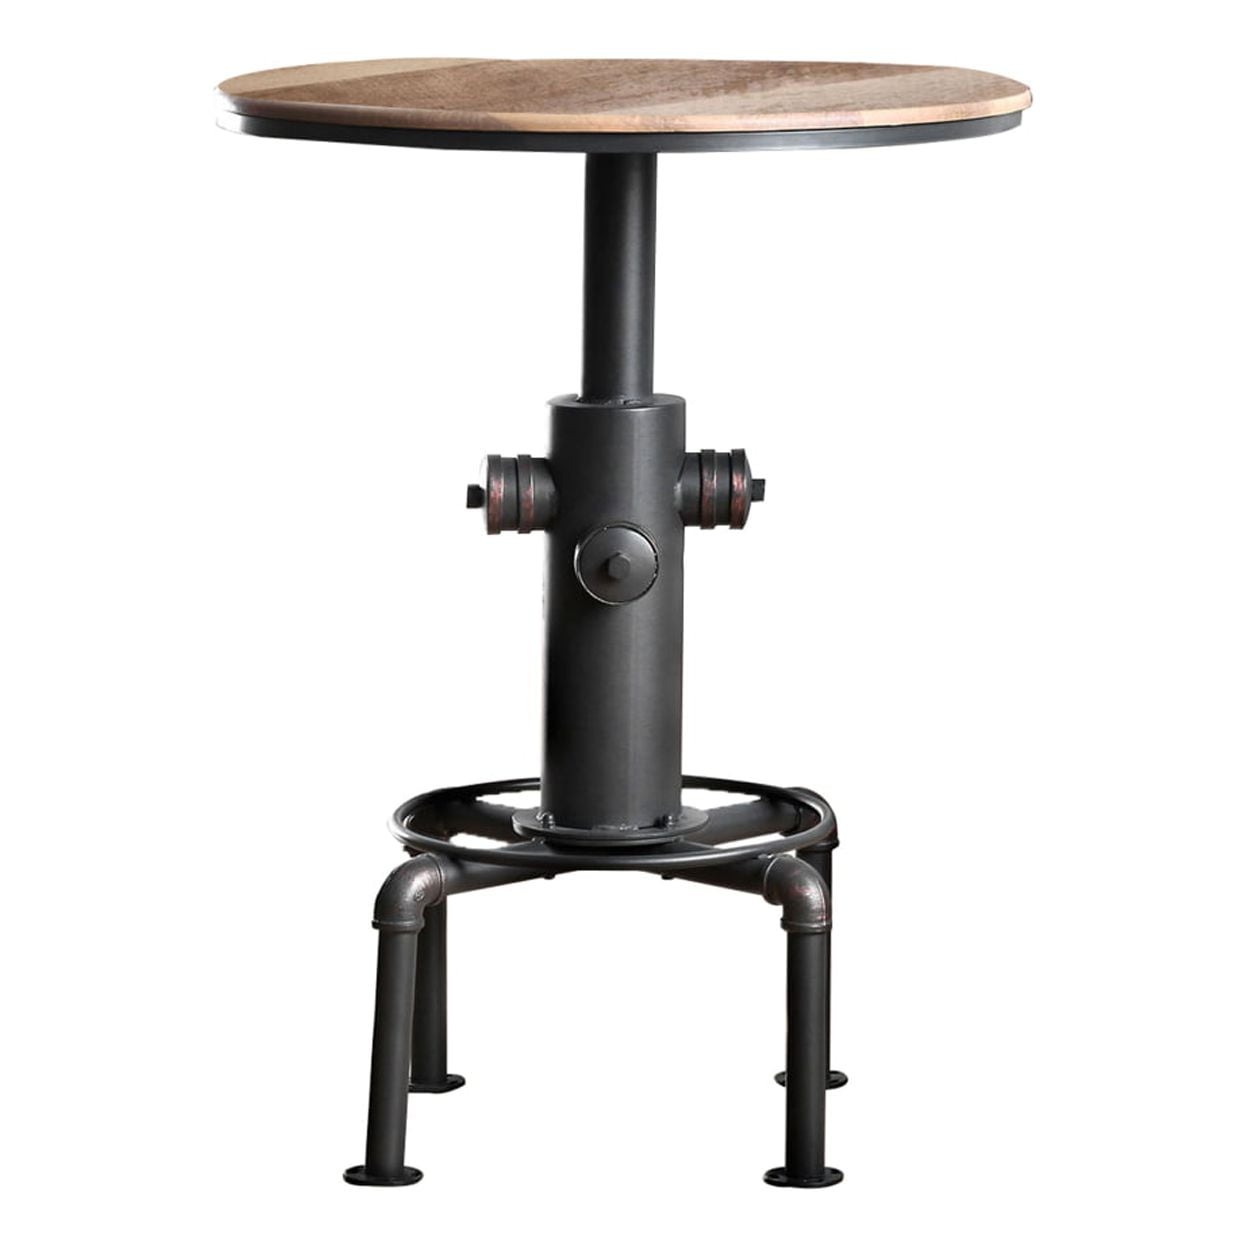 Bm207902 Bar Table With Fire Hydrant Style Metal Base, Black & Brown